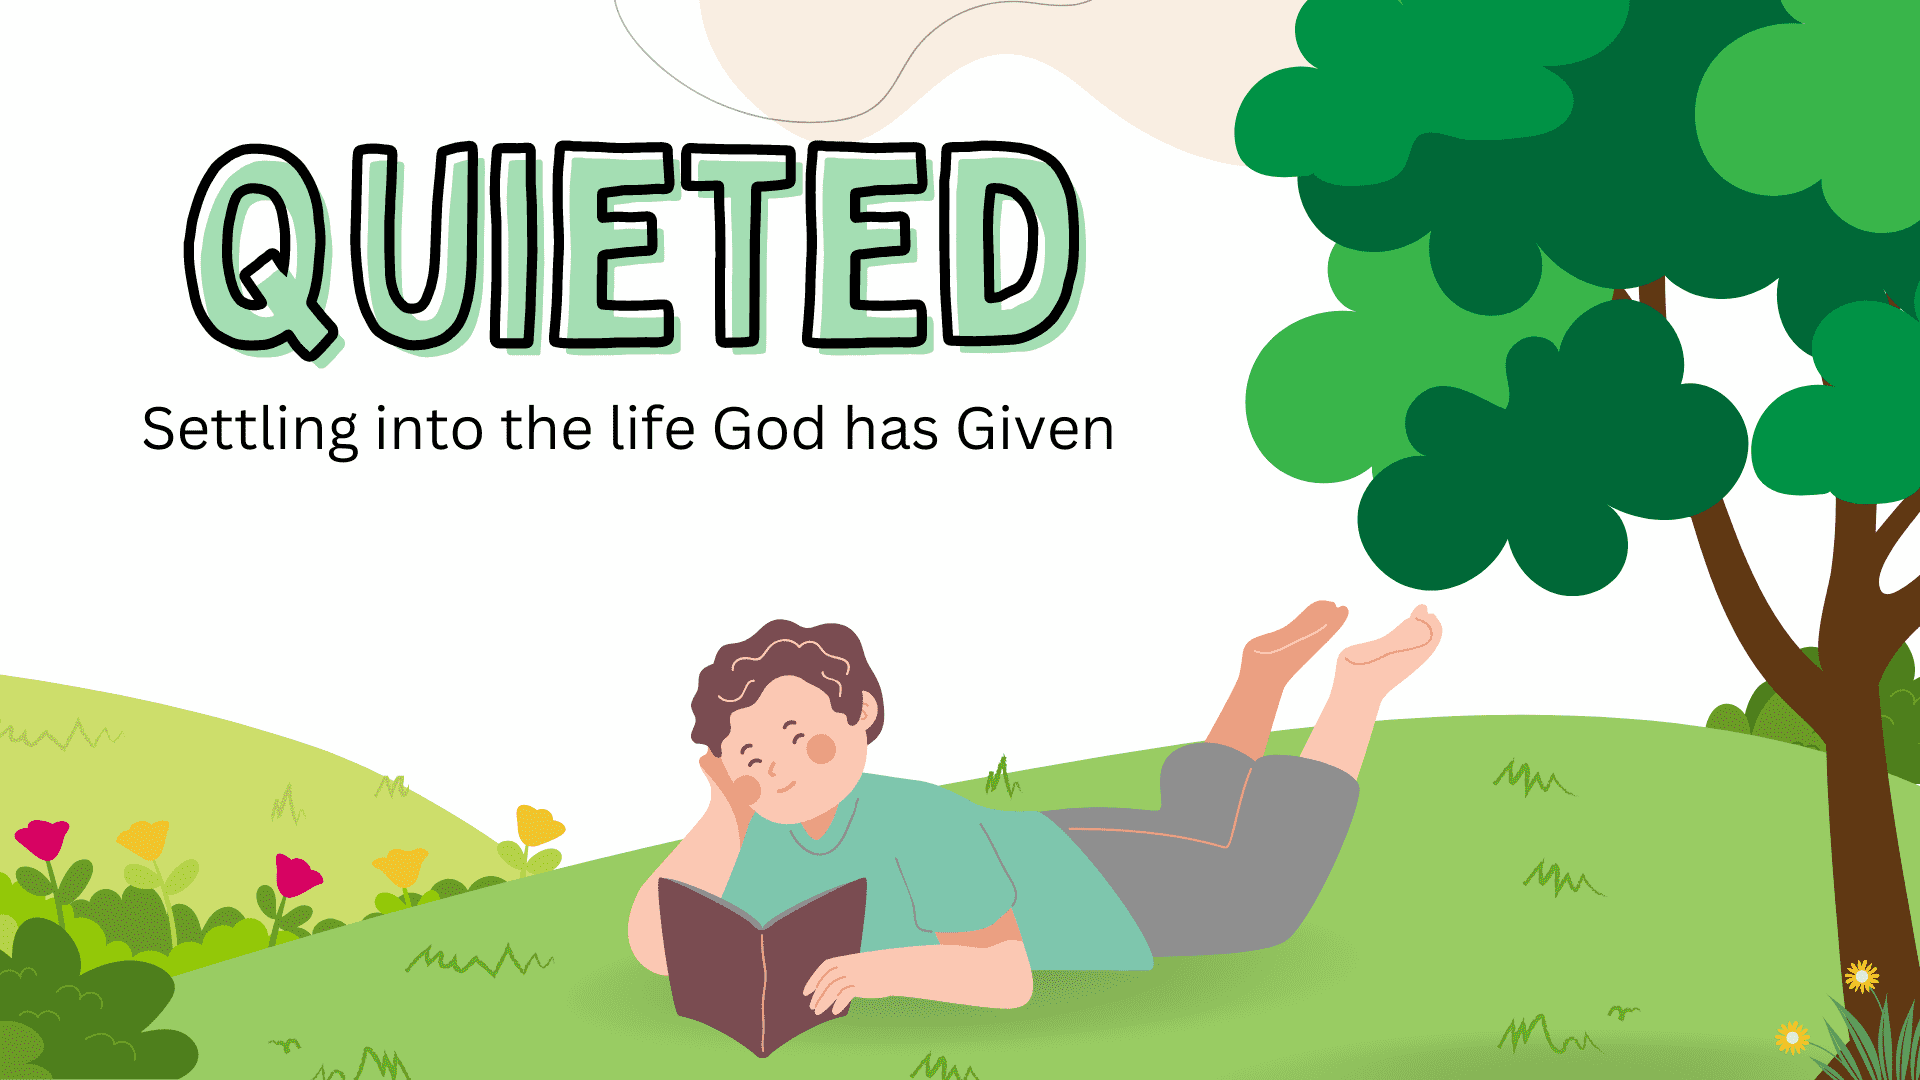 Quieted: It Is Well With My Soul